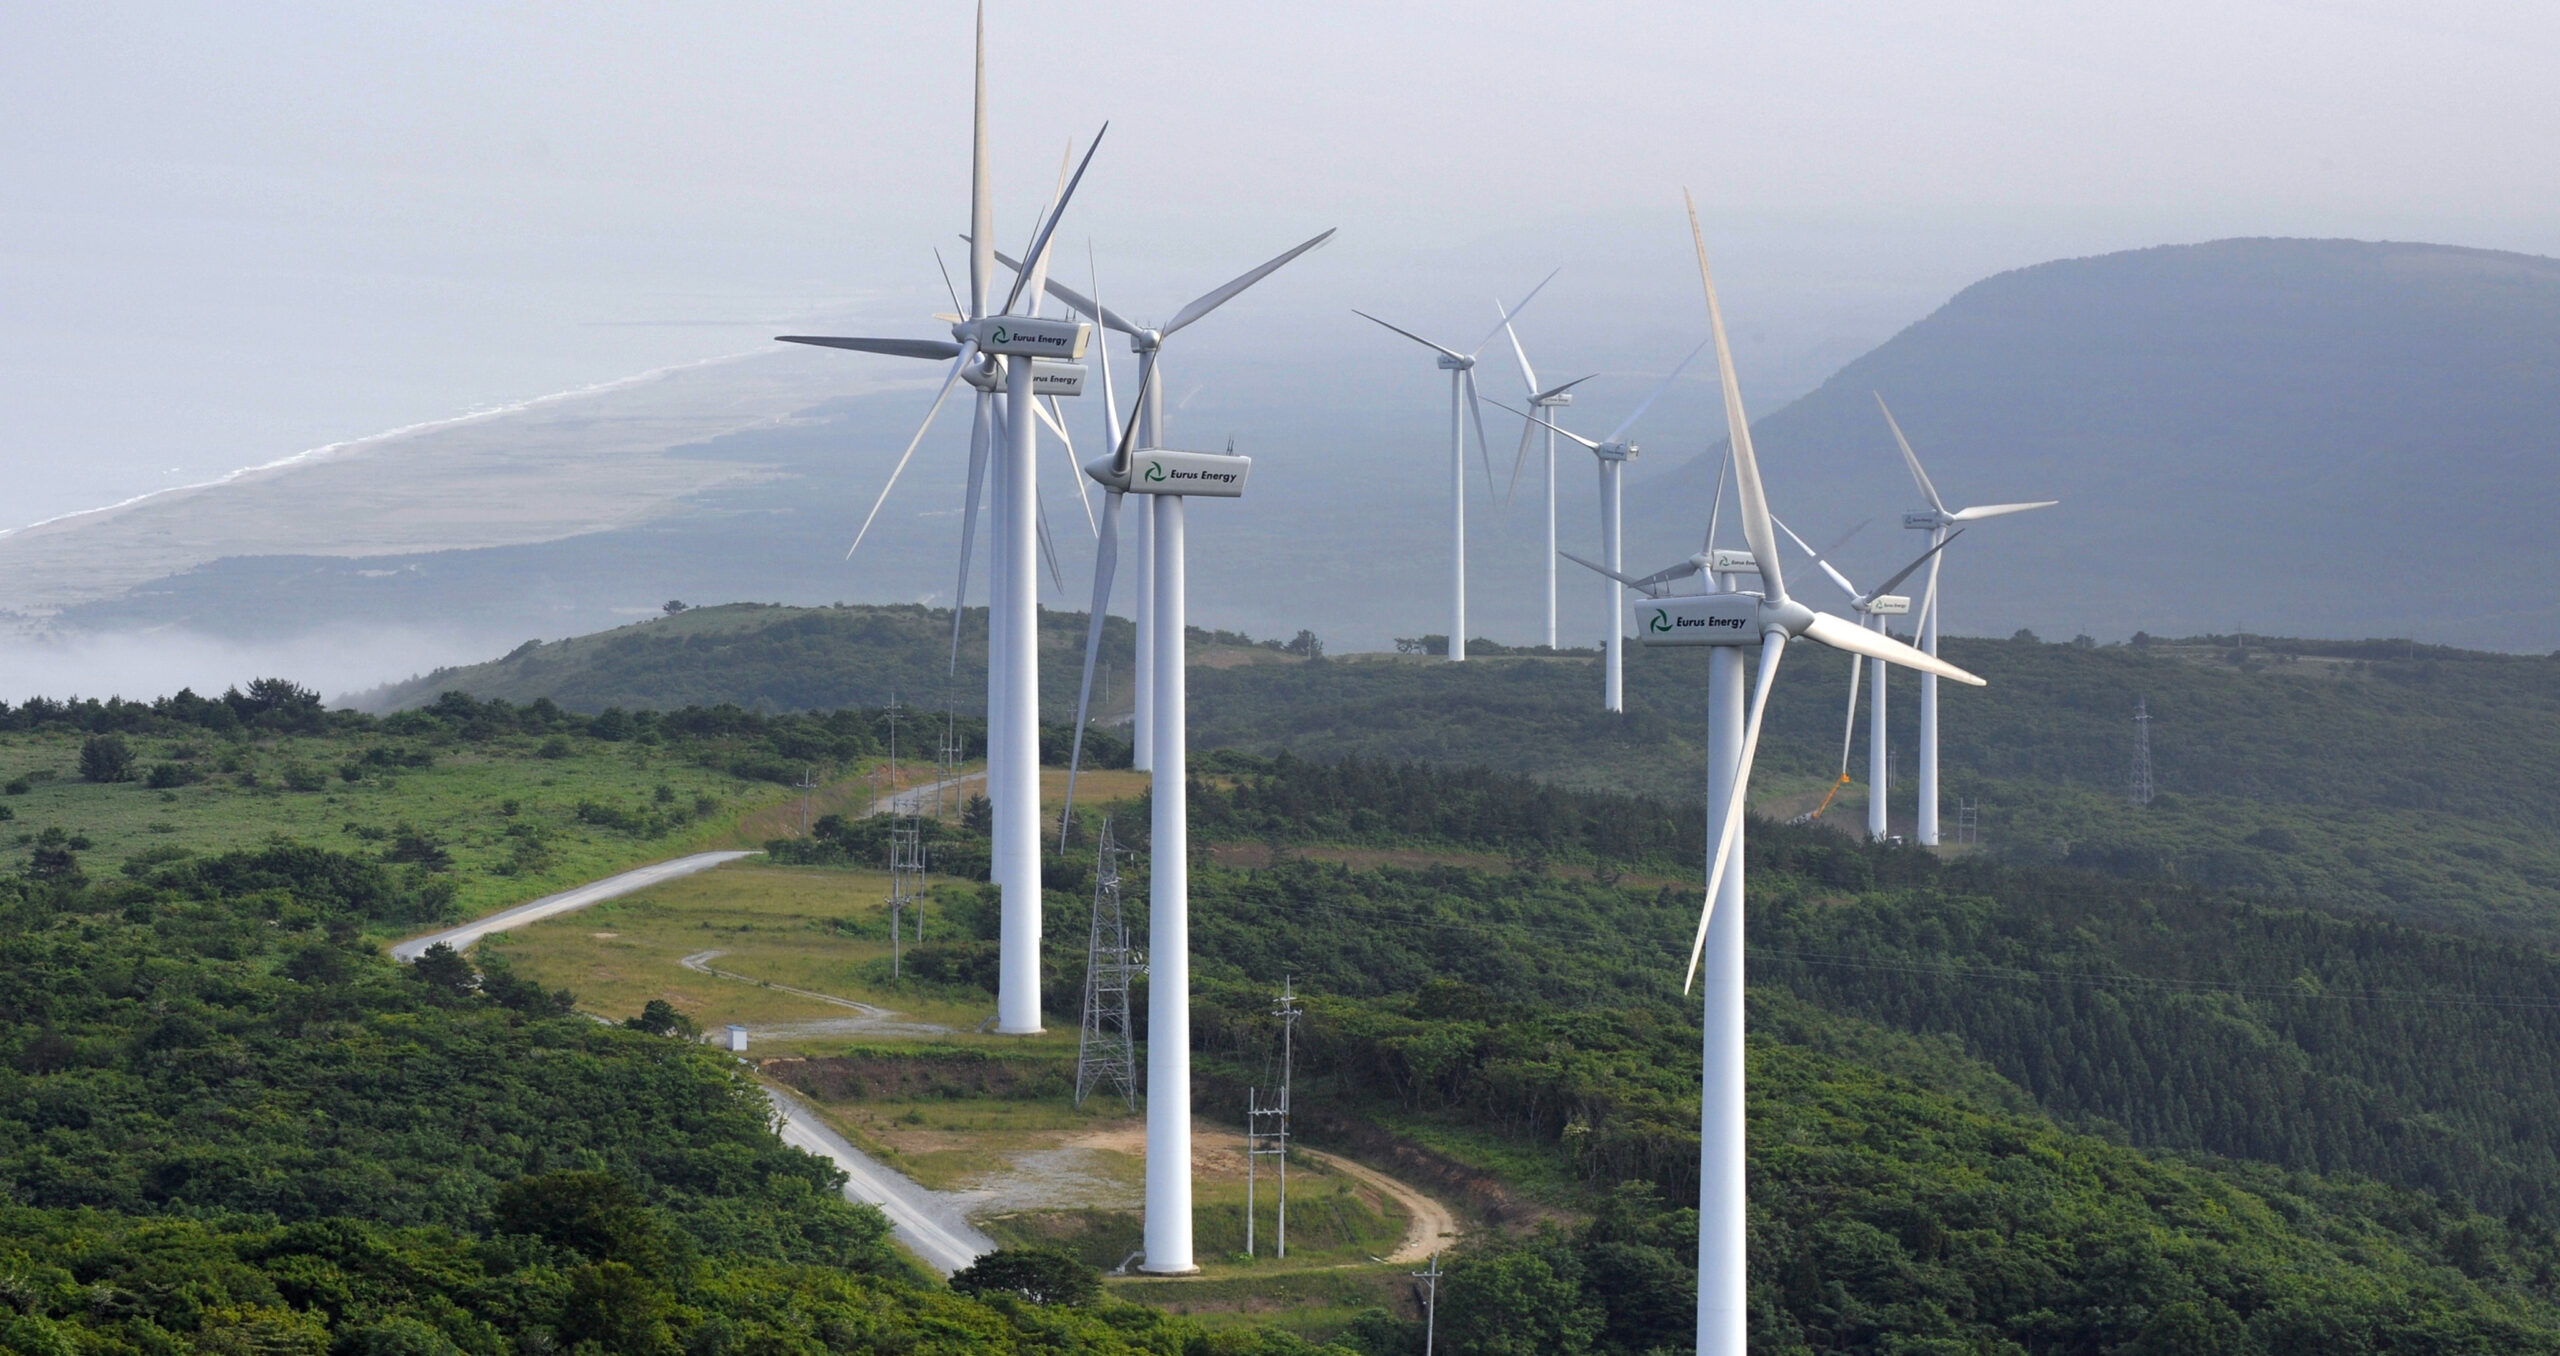 Japan plans to more than quintuple the share of wind power to 5 per cent of electricity output by the end of the decade. (Photo: Kazuhiro Nogi/AFP via Getty Images) 